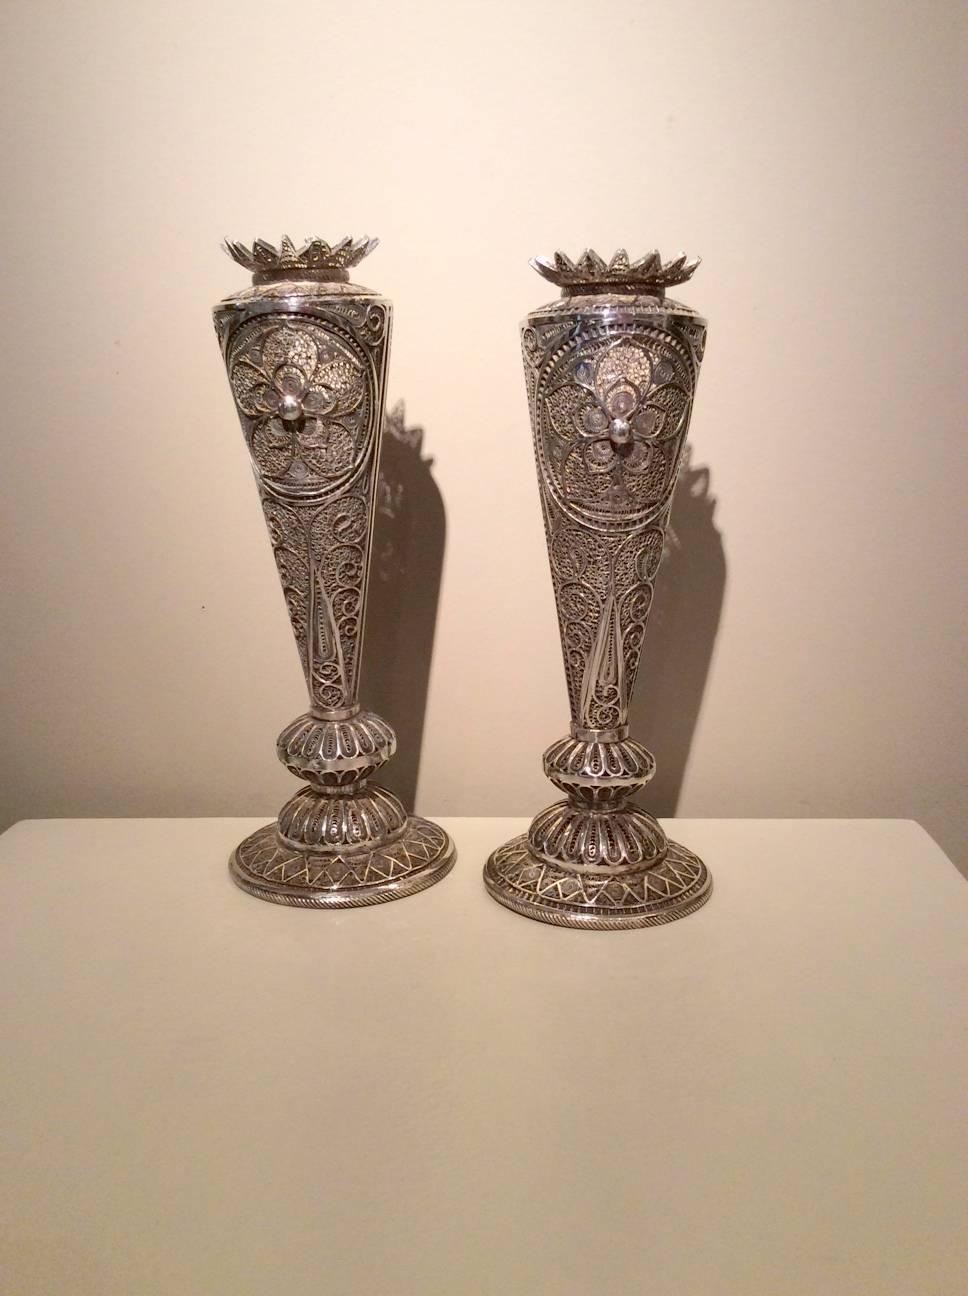 Islamic Silver Candlesticks Decorated in Silver Filigree, Early 19th Century